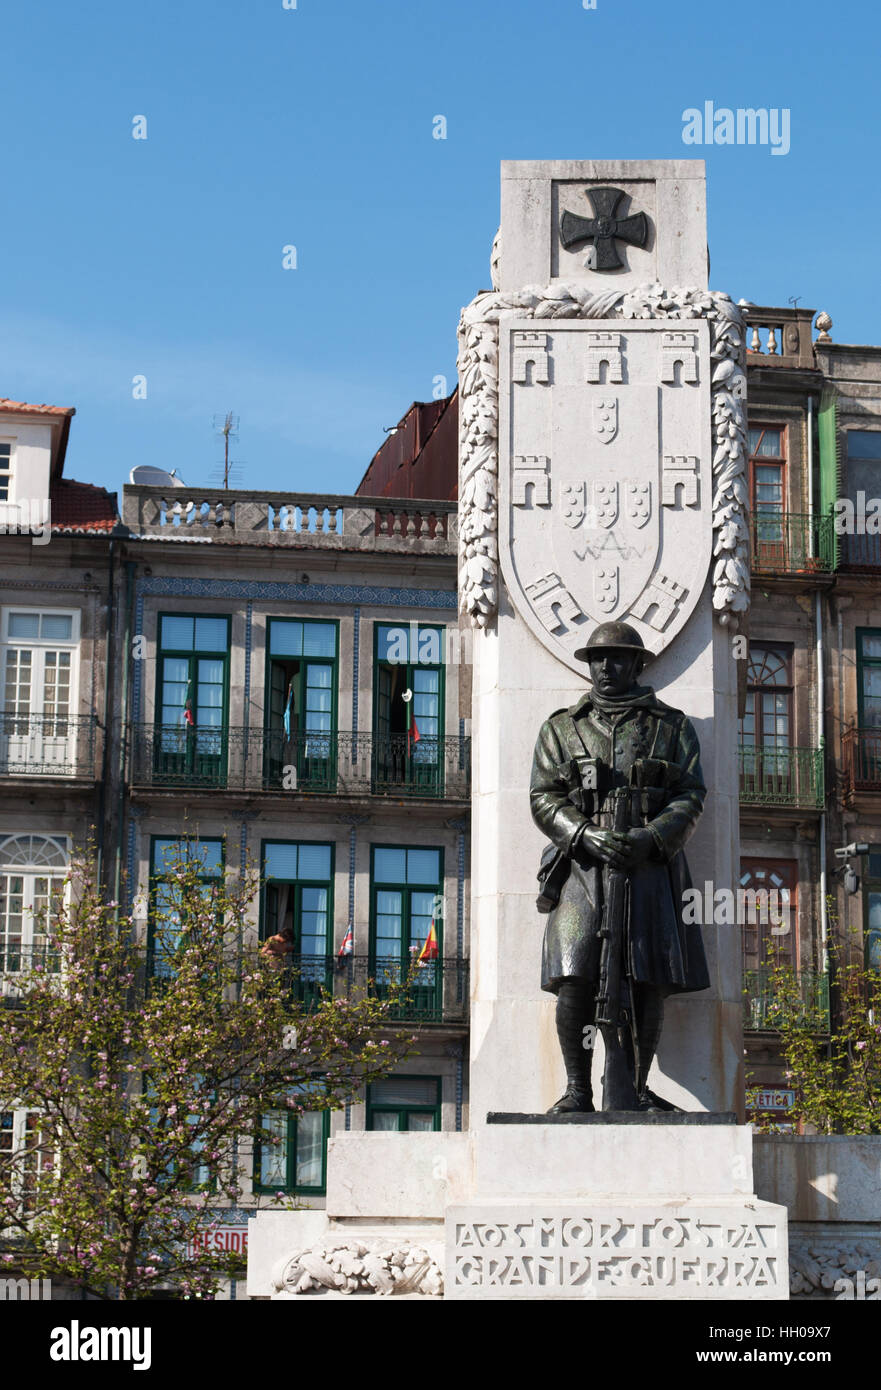 Porto, Portugal: the Monument to the Dead of the Great War of Porto, by the artist Henrique Moreira, inaugurated on April 9, 1928 Stock Photo